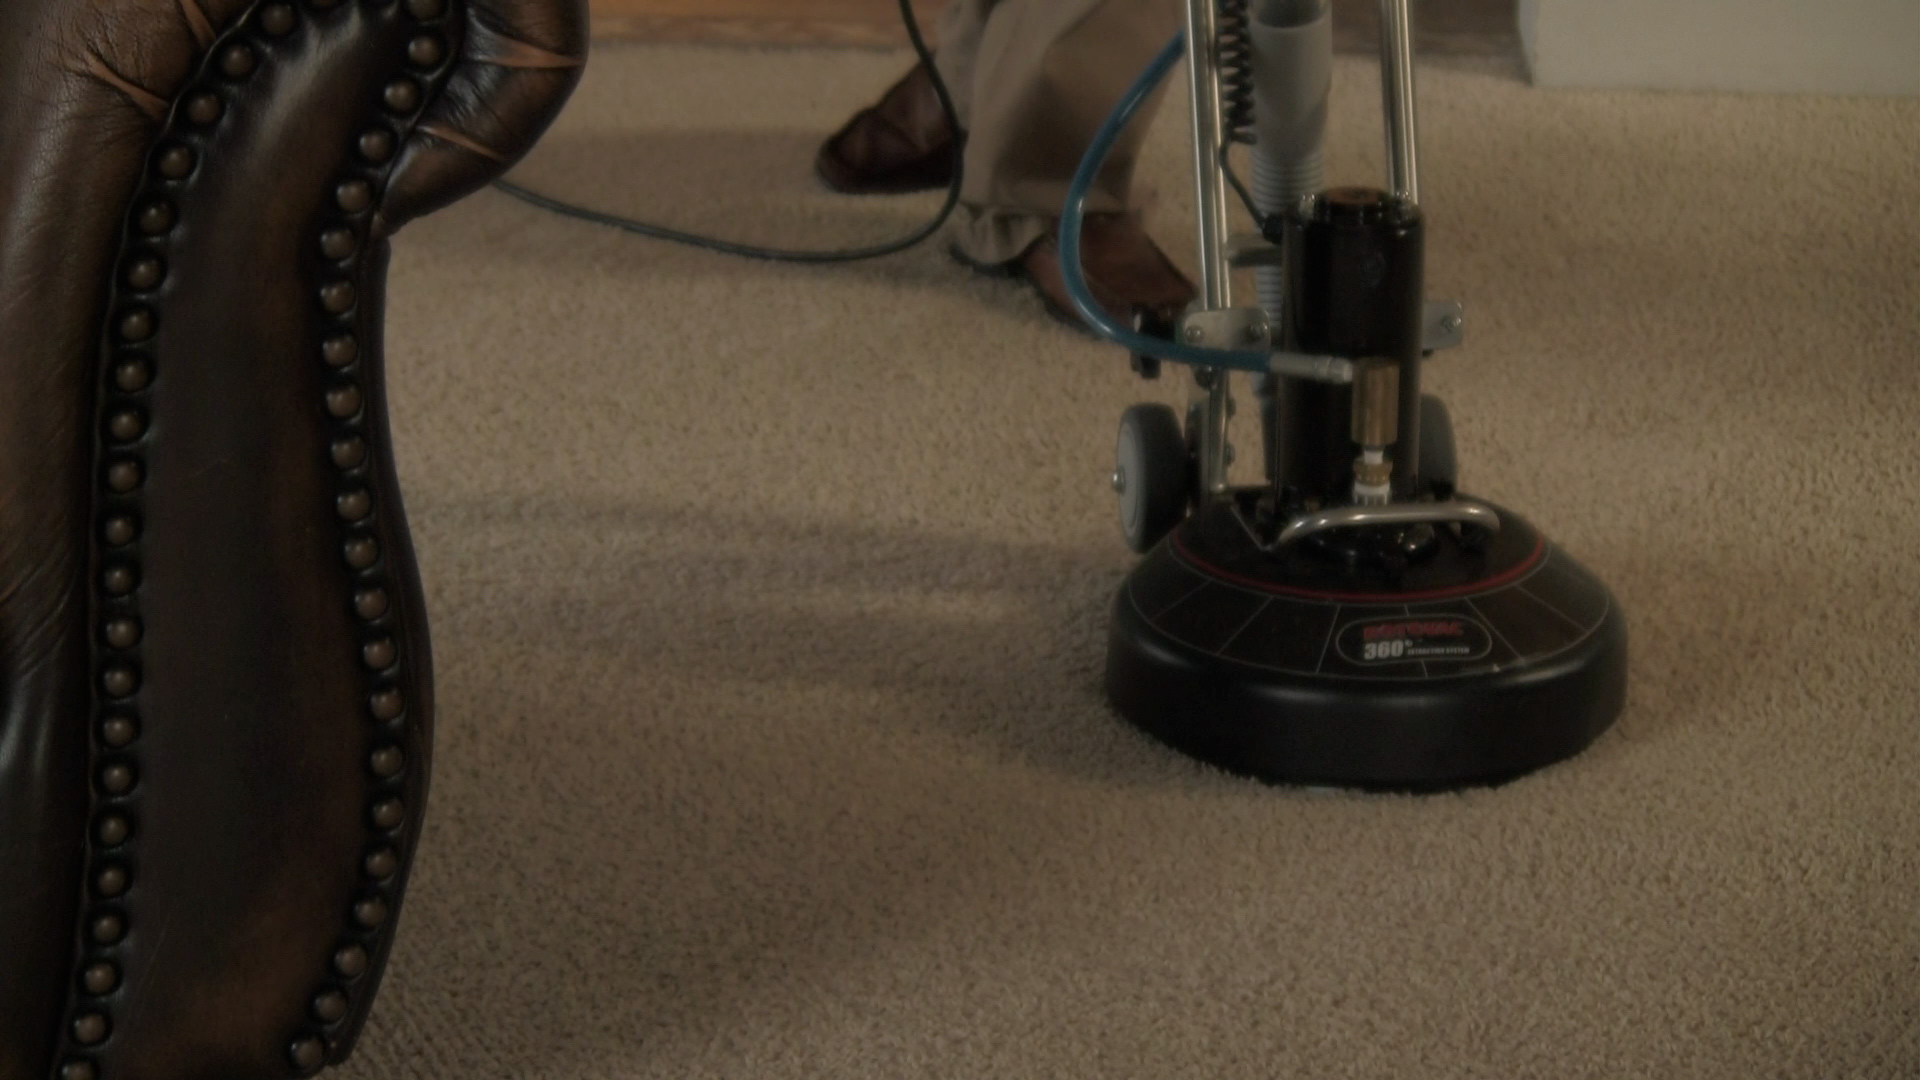 Cleaning your carpets.